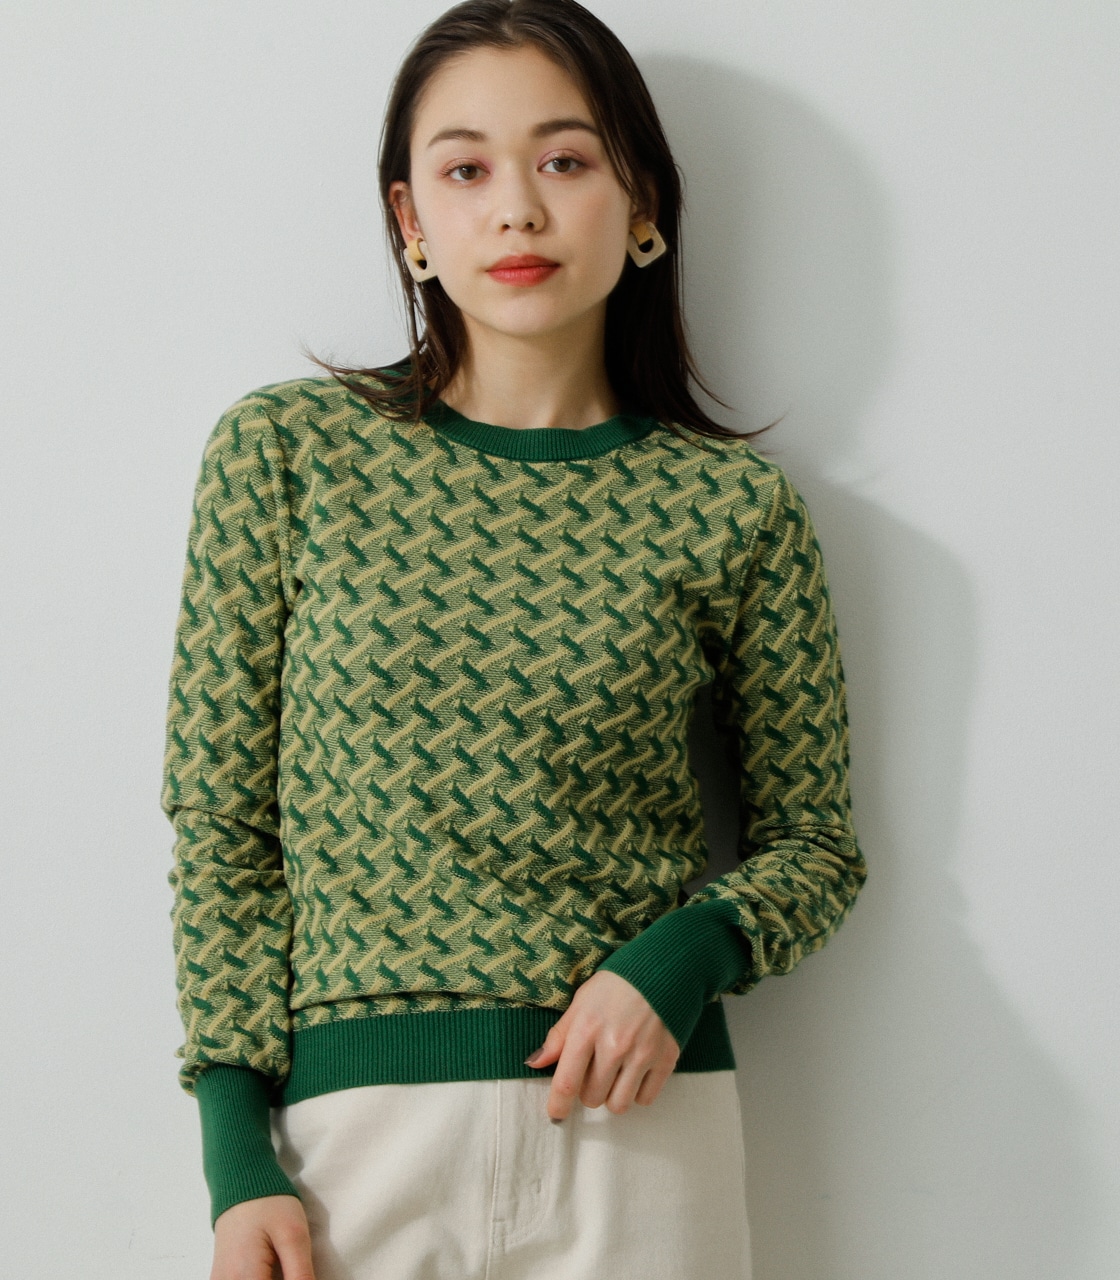 JACQUARD KNIT TOPS/ジャガードニットトップス｜AZUL BY MOUSSY